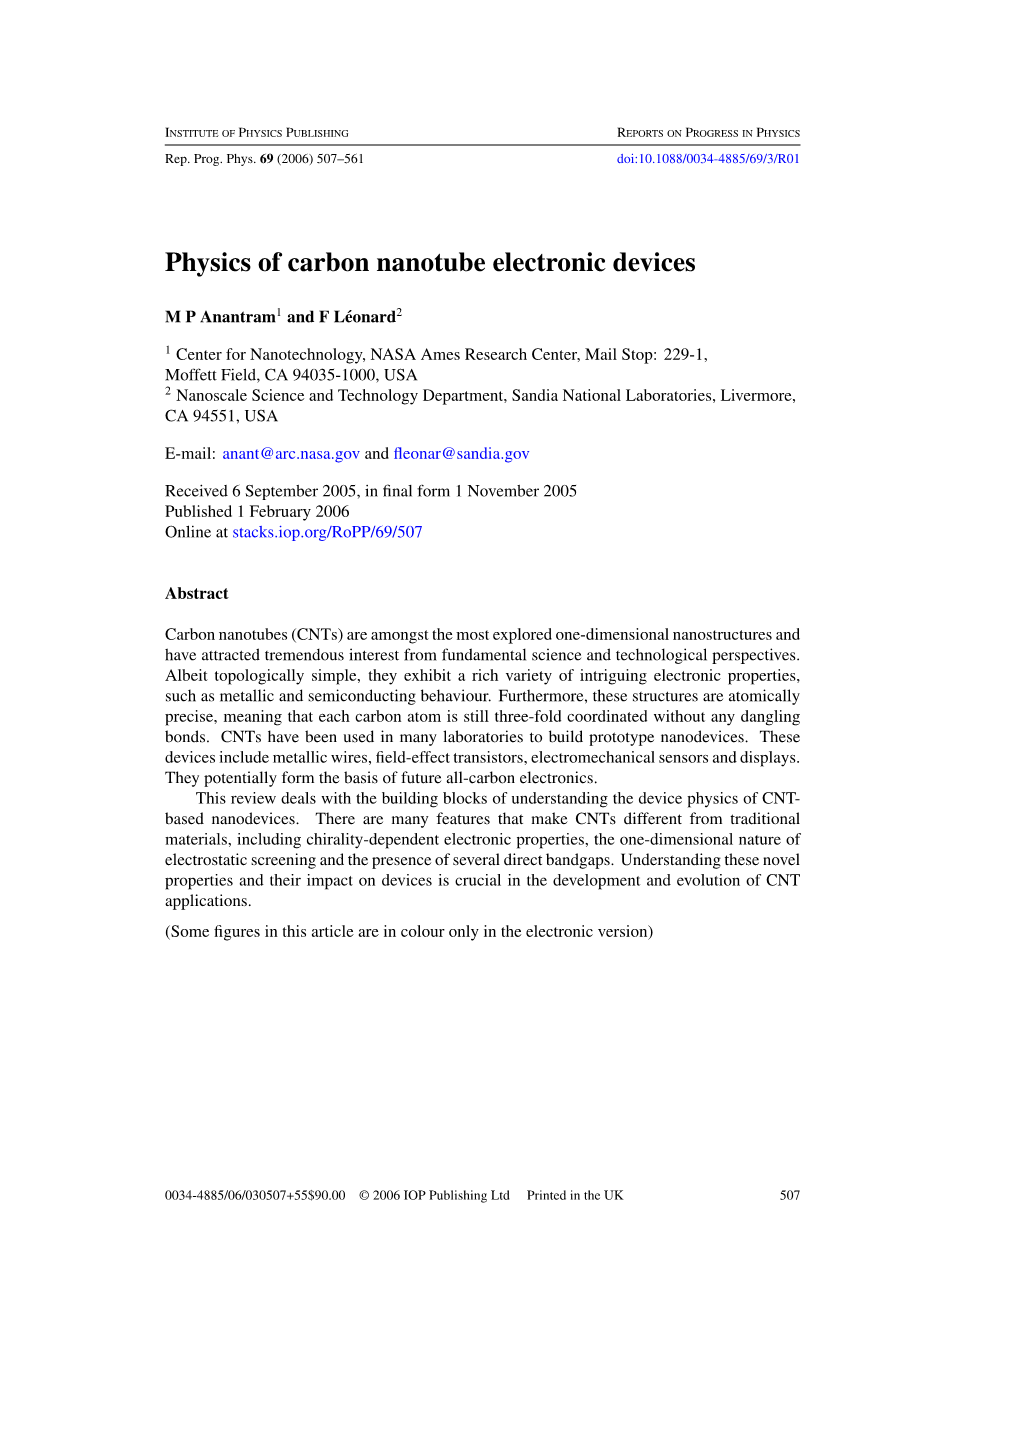 Physics of Carbon Nanotube Electronic Devices